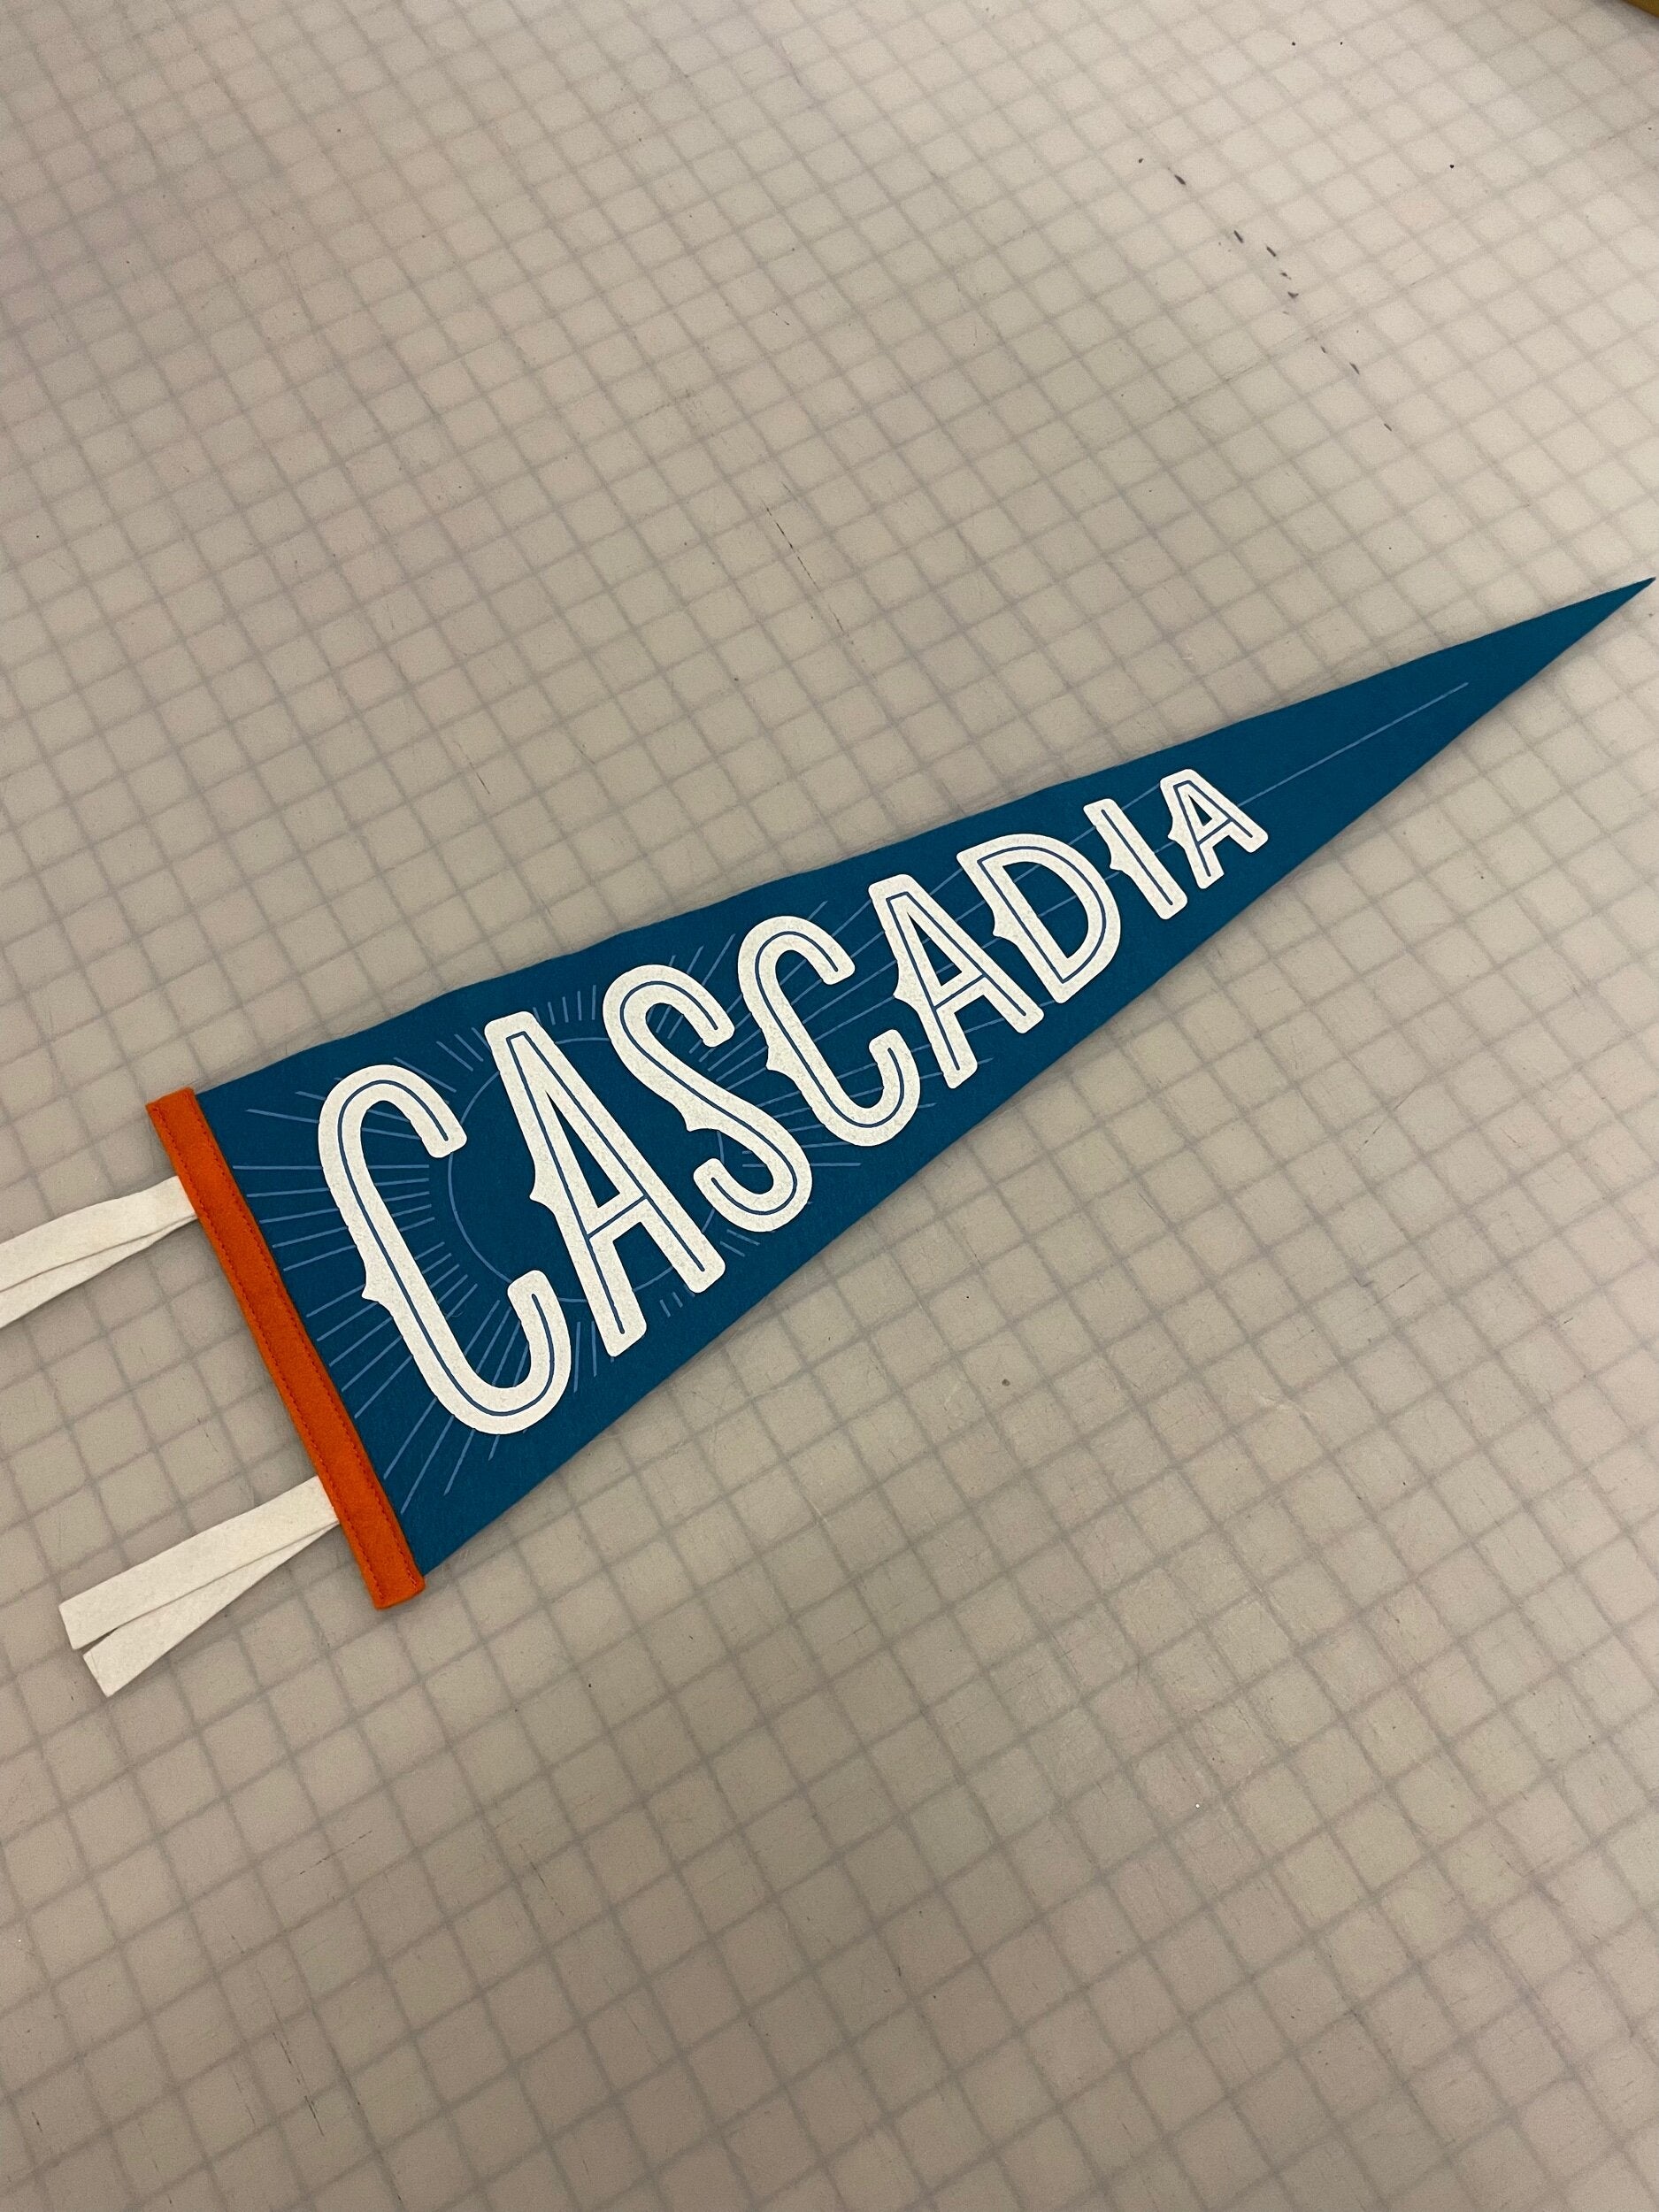 Dark Blue pennant flag that says "Cascadia" in white decorative letters